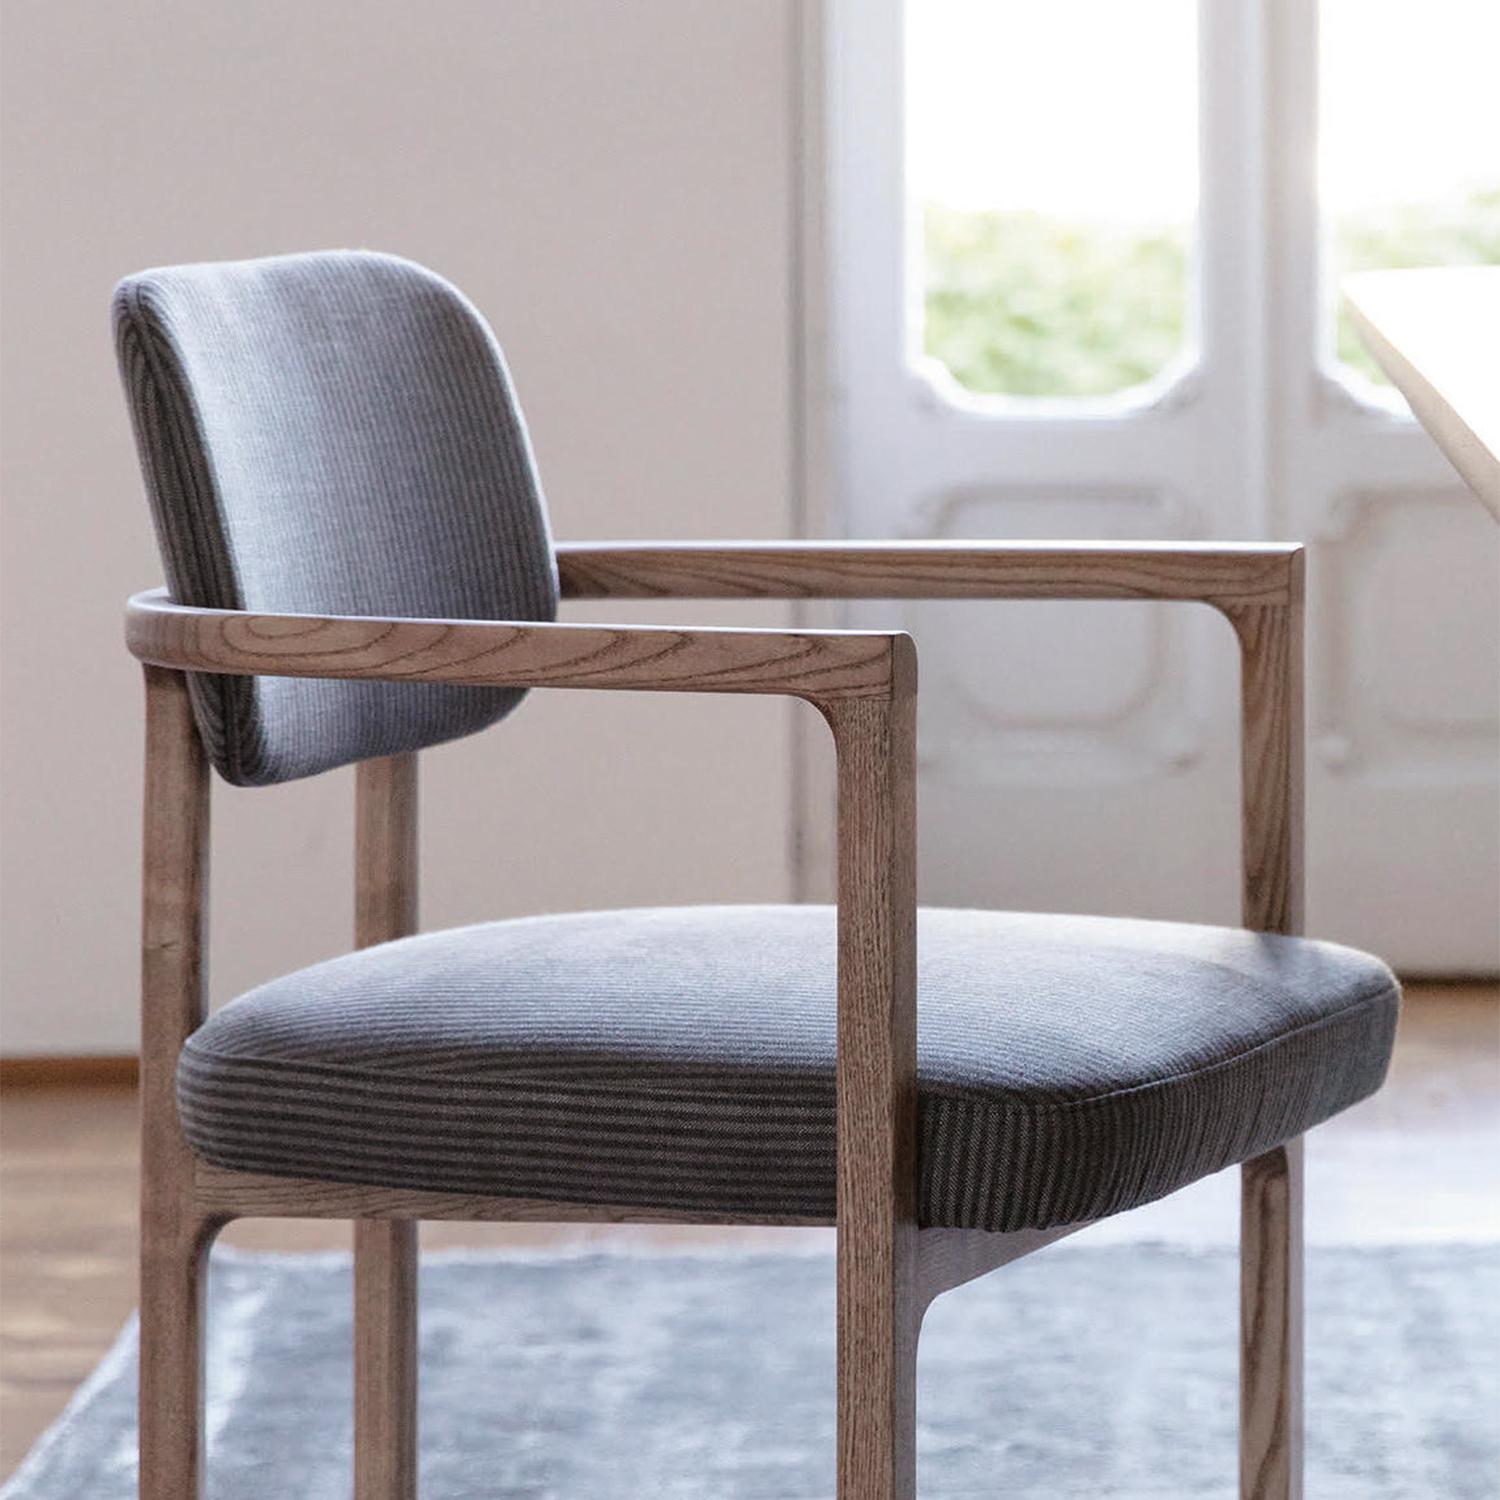 Chair Robby with structure in solid ash in natural finish,
seat and backrest upholstered and covered with striped 
fabric in light grey and anthracite grey color.
Also available with other fabrics, on request.